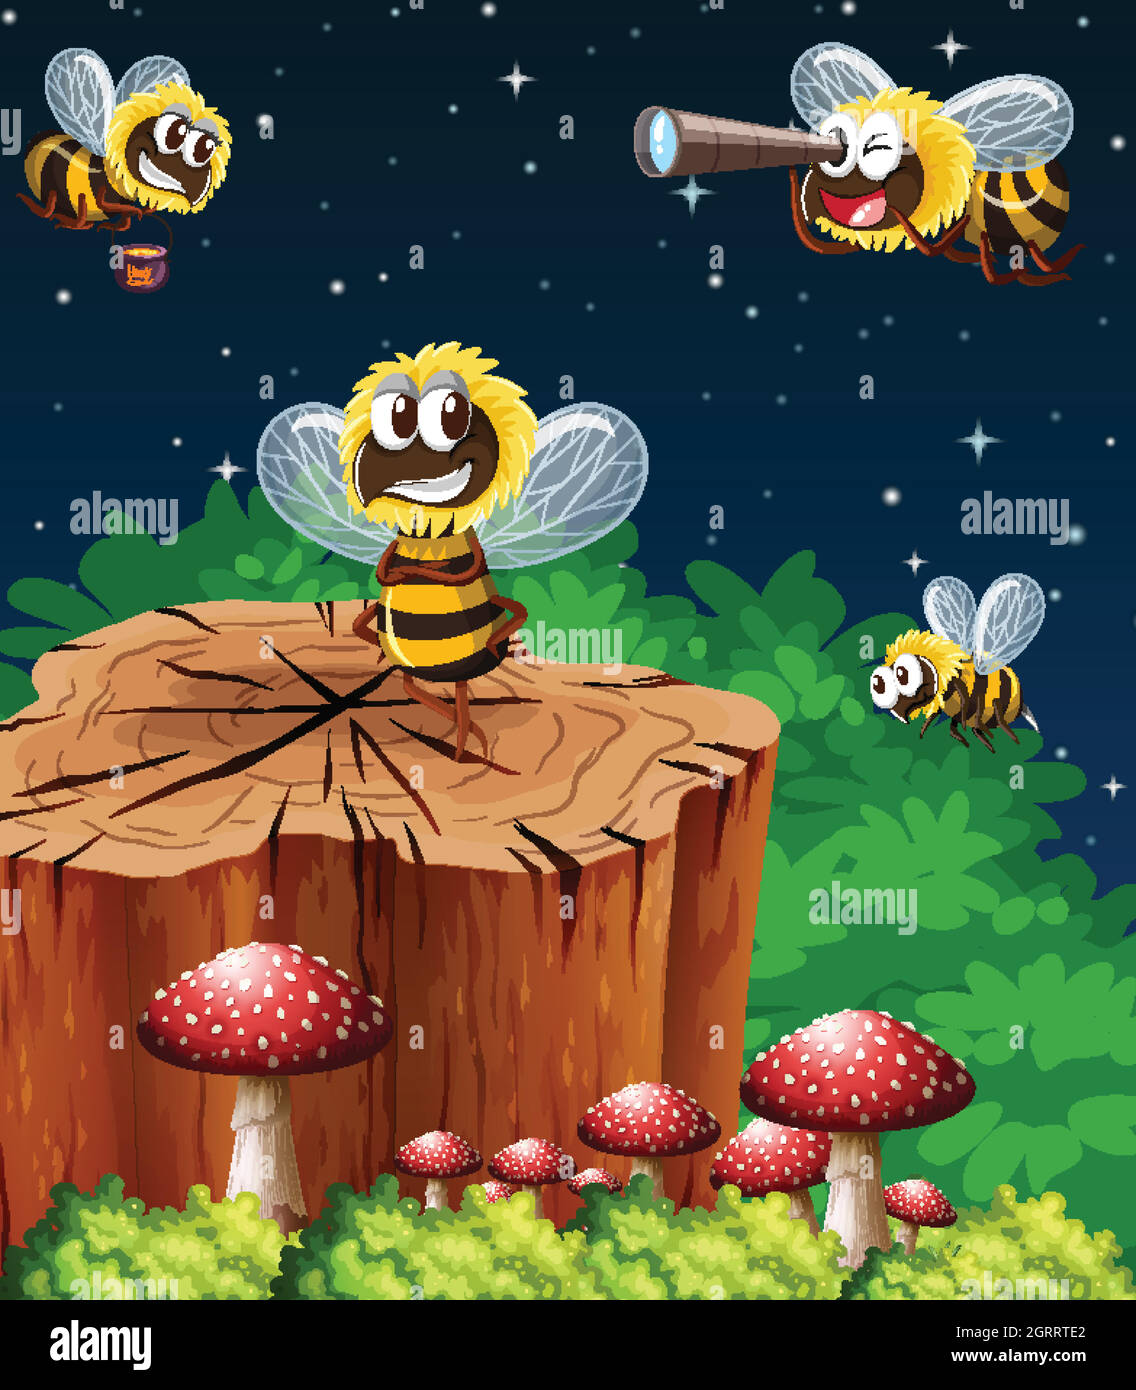 Many bees living in the garden scene at night Stock Vector